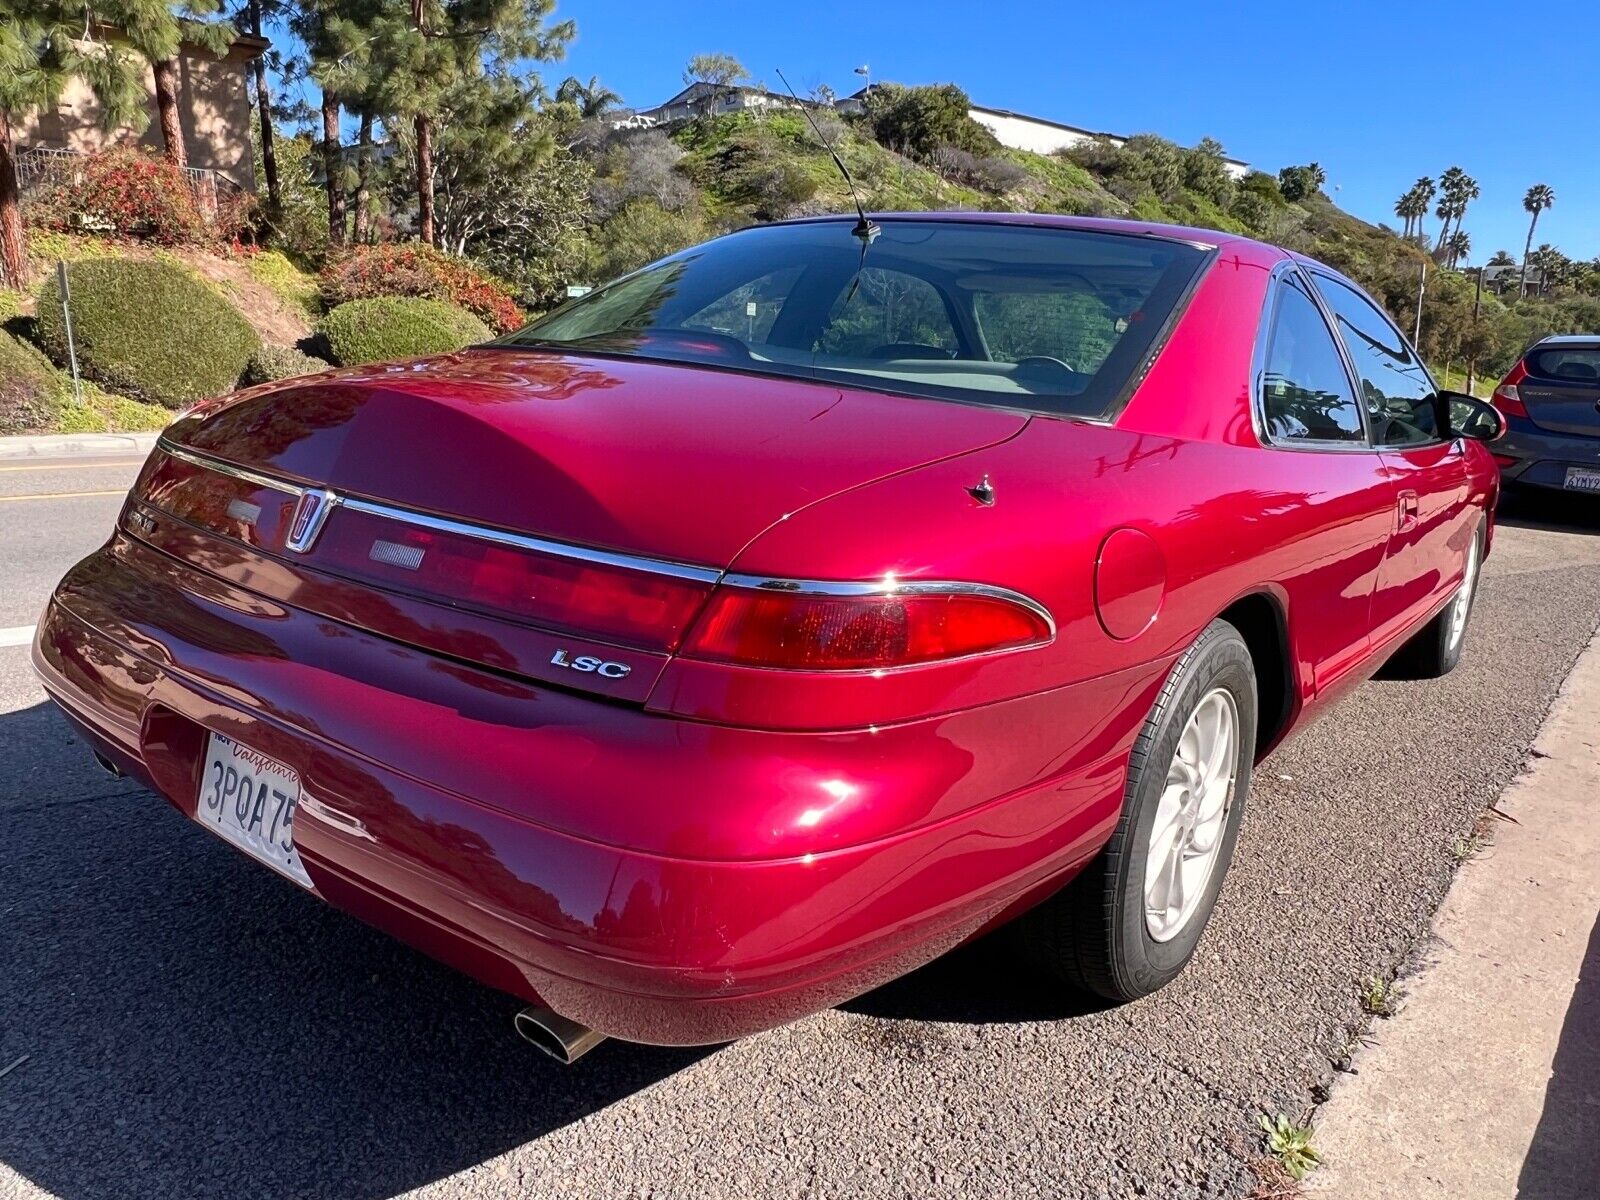 1995 Lincoln Mark VII LSC - right rear low